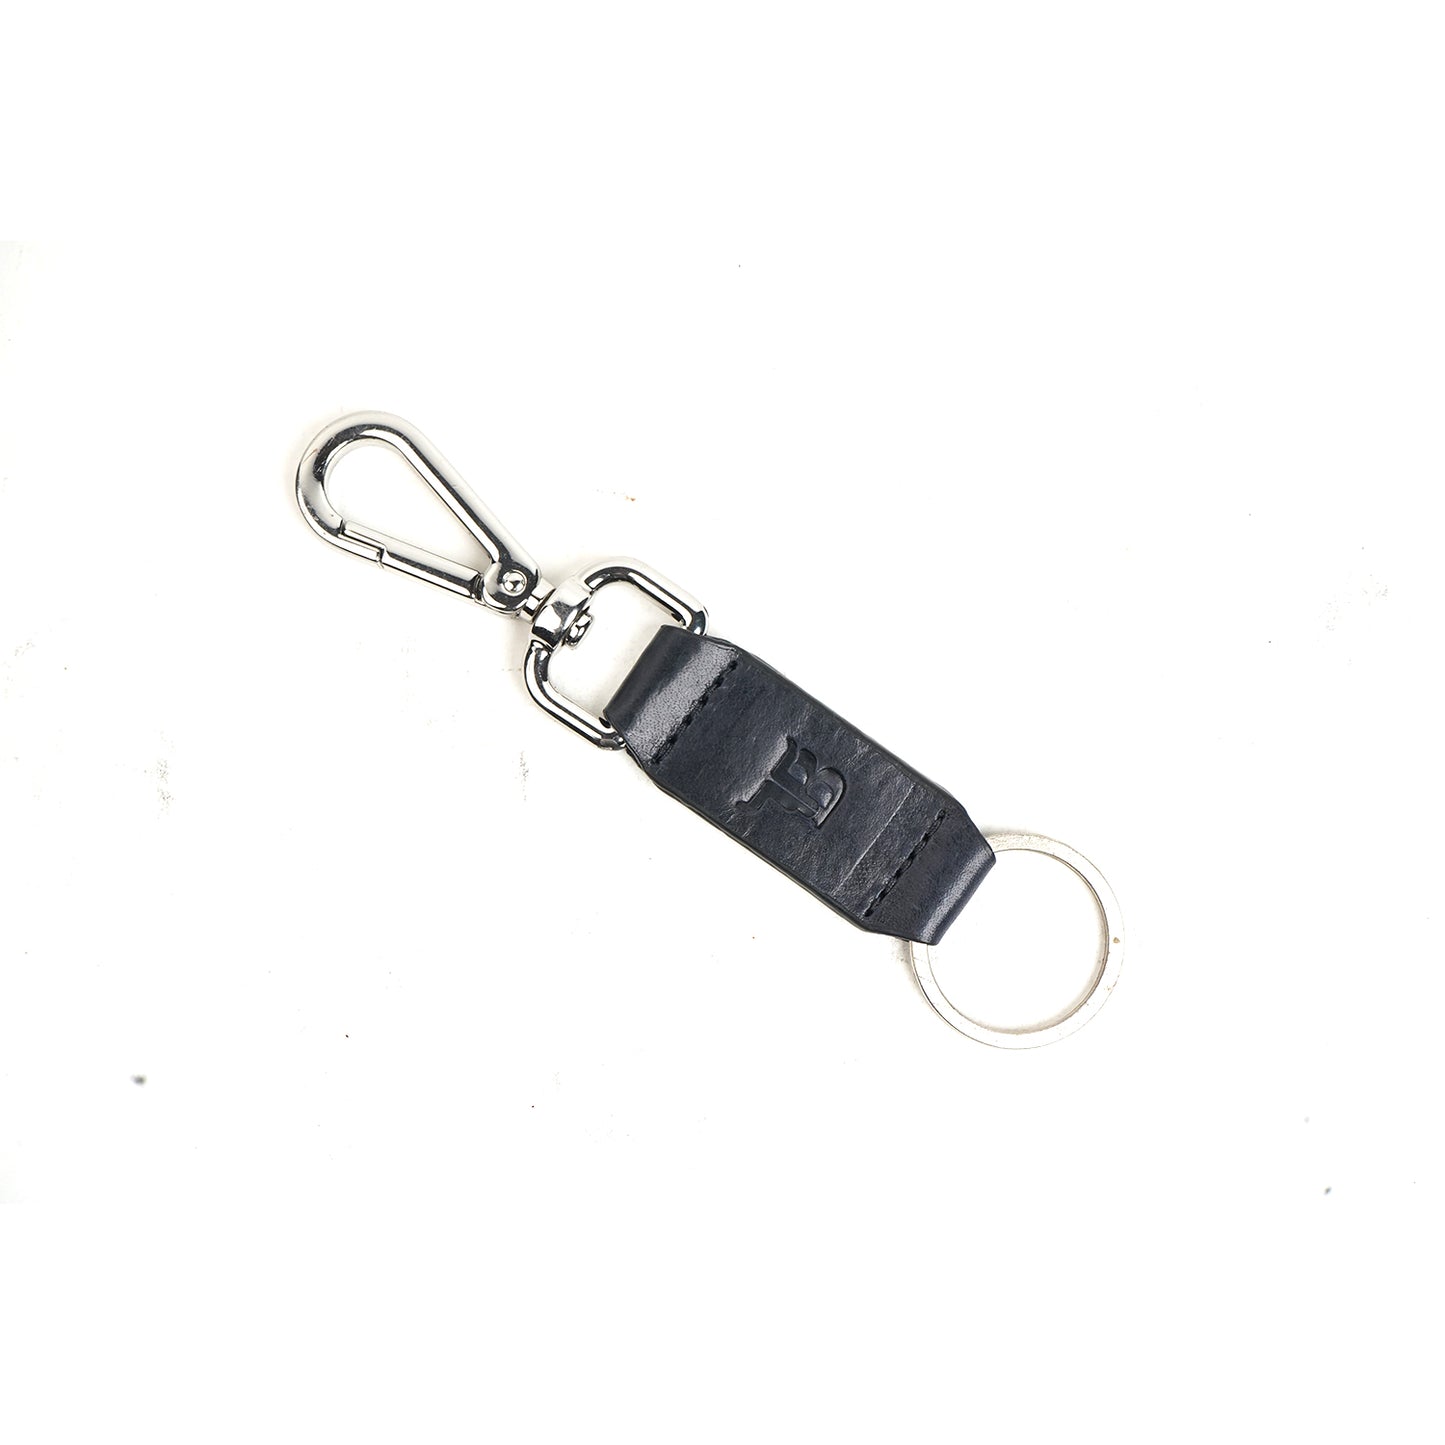 Car Sunglass/Mobile Holder and Leather Keyring Combo